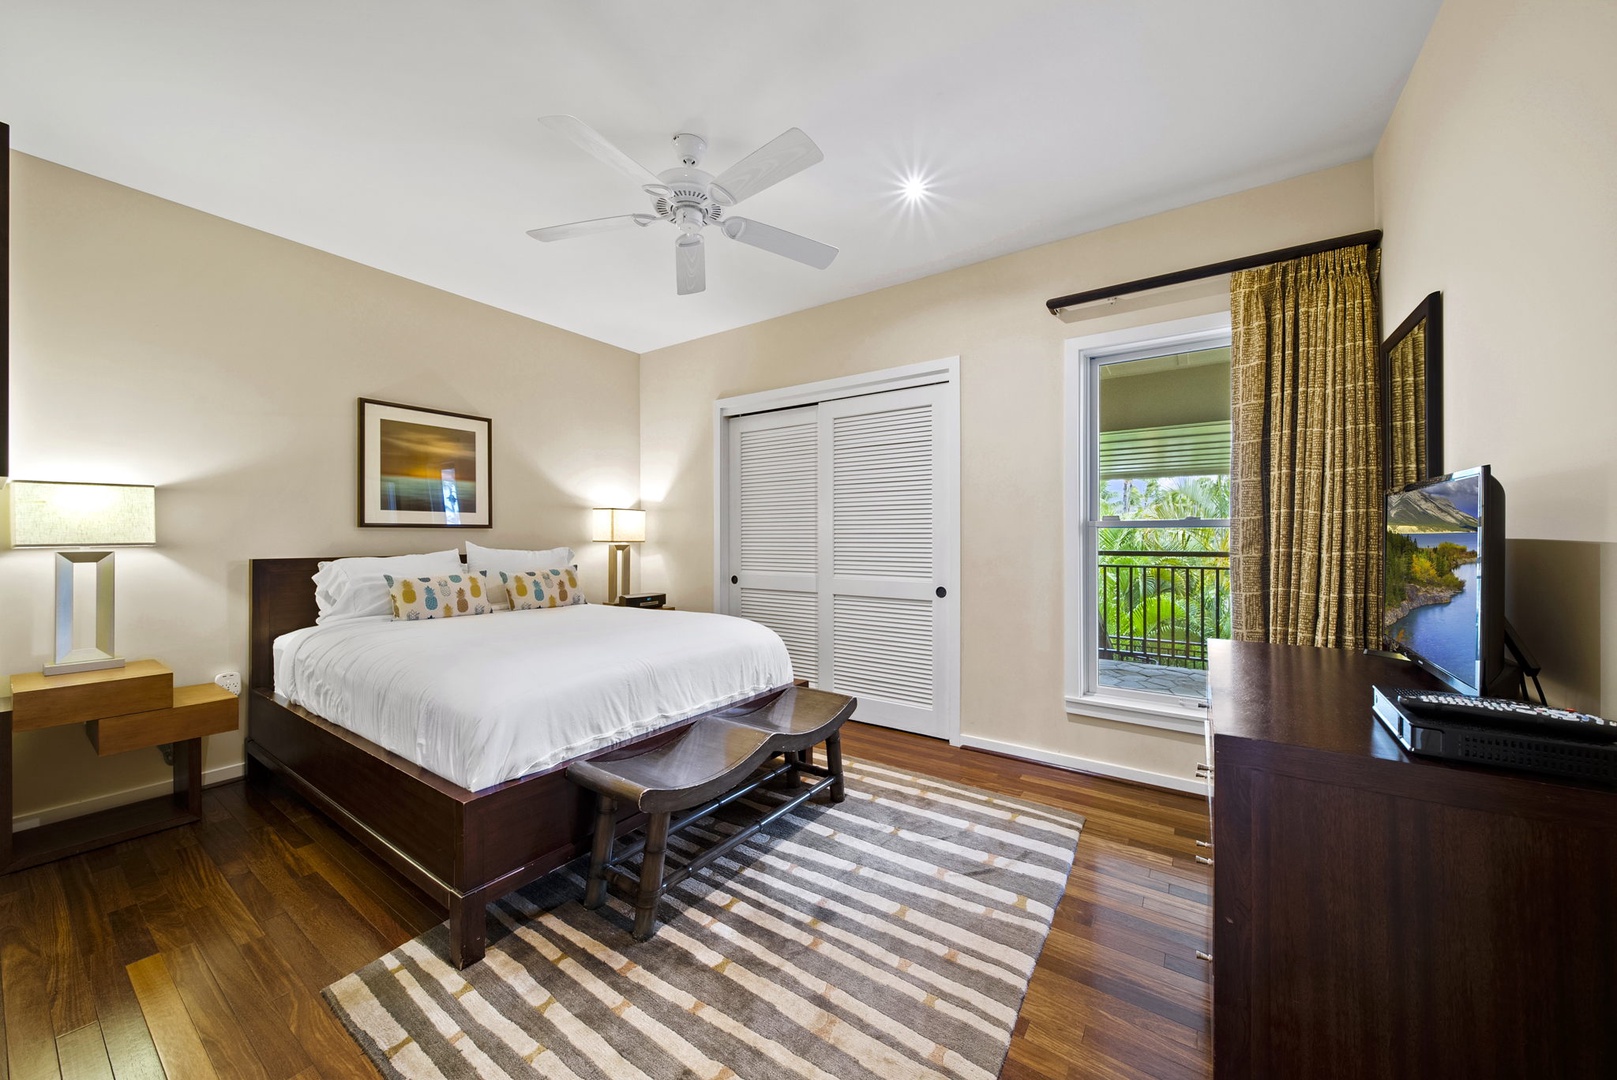 Kahuku Vacation Rentals, Turtle Bay Villas 307 - The additional bedrooms are suited to luxurious queen-size beds, upgraded furnishings, and flat-screen TVs